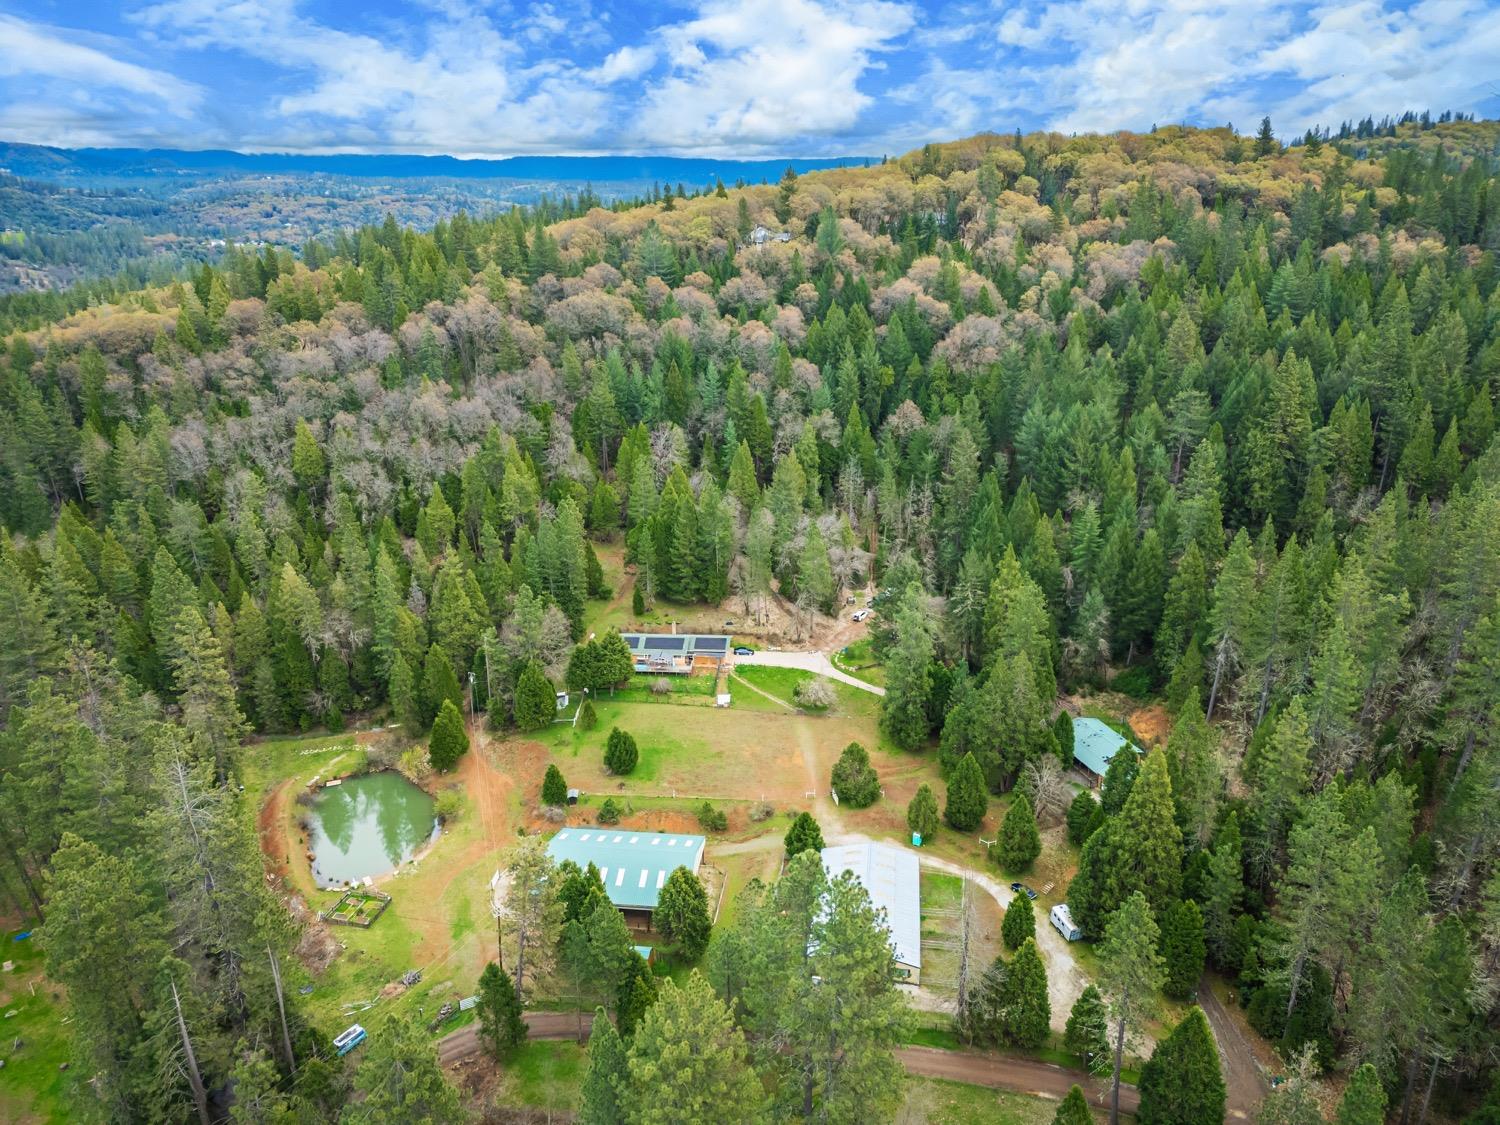 Photo of 13851 Lost Lake Rd in Grass Valley, CA